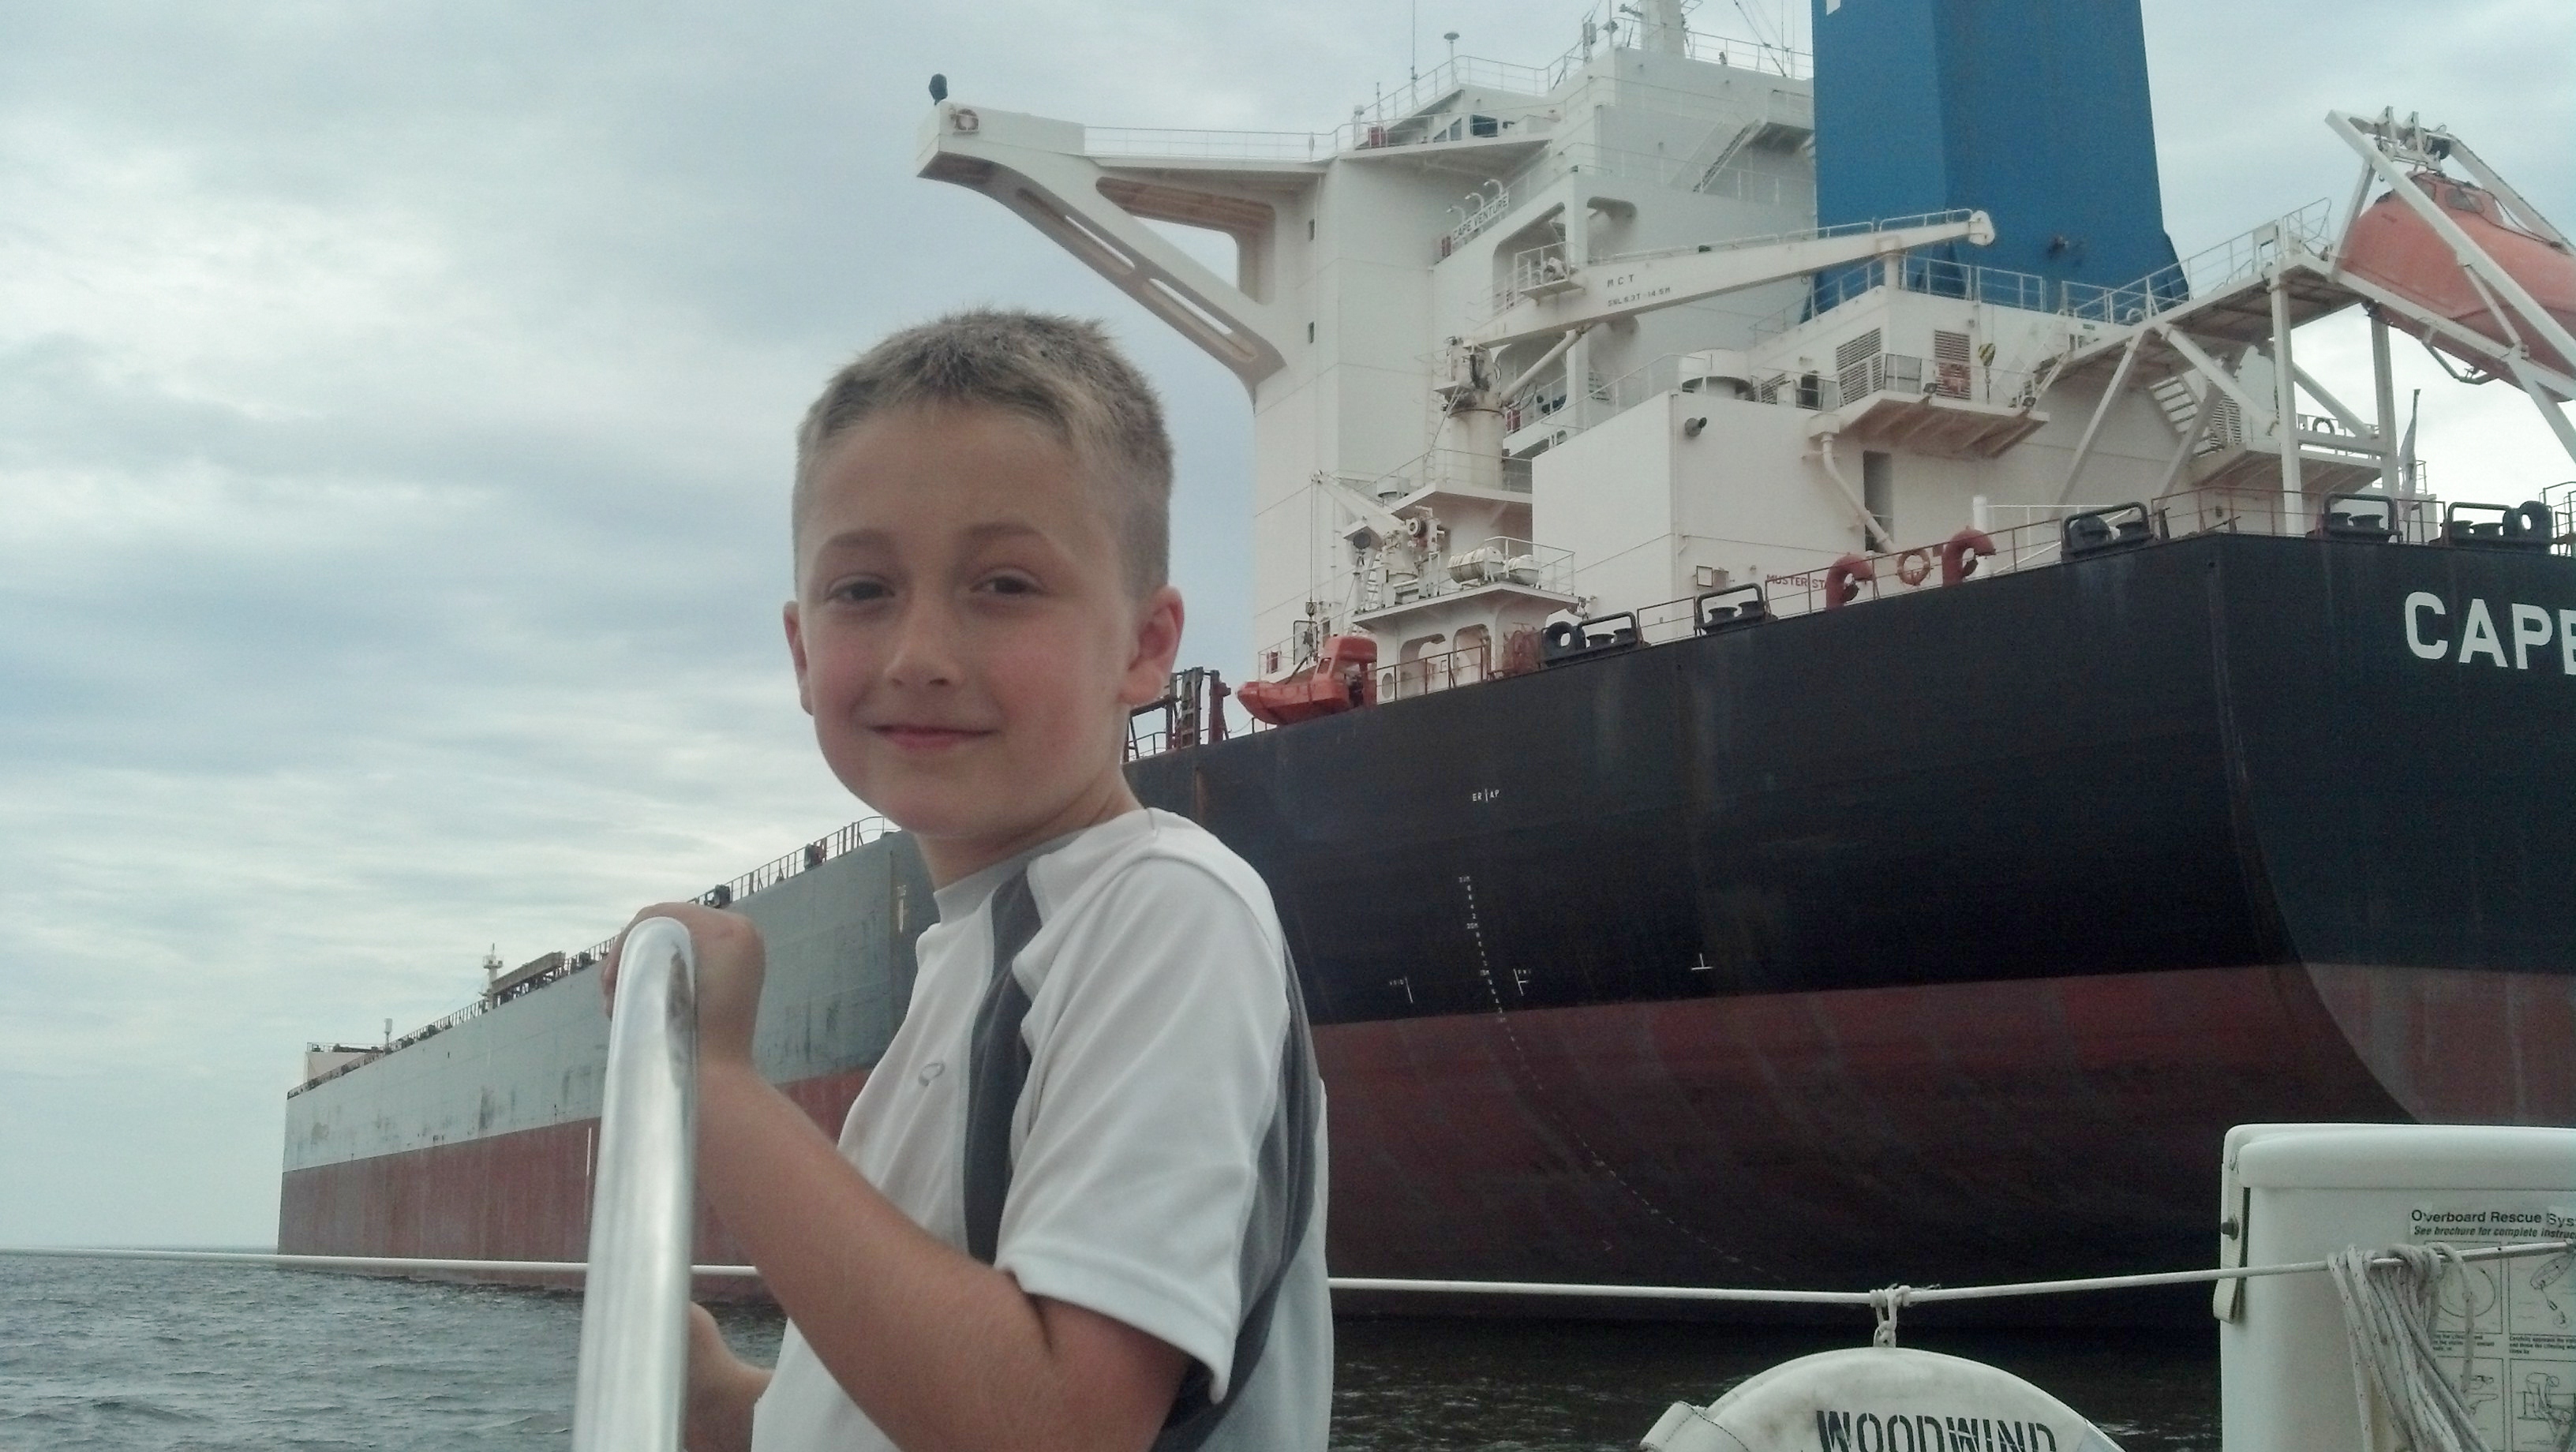 Young Keegan takes command with a big freighter behind him